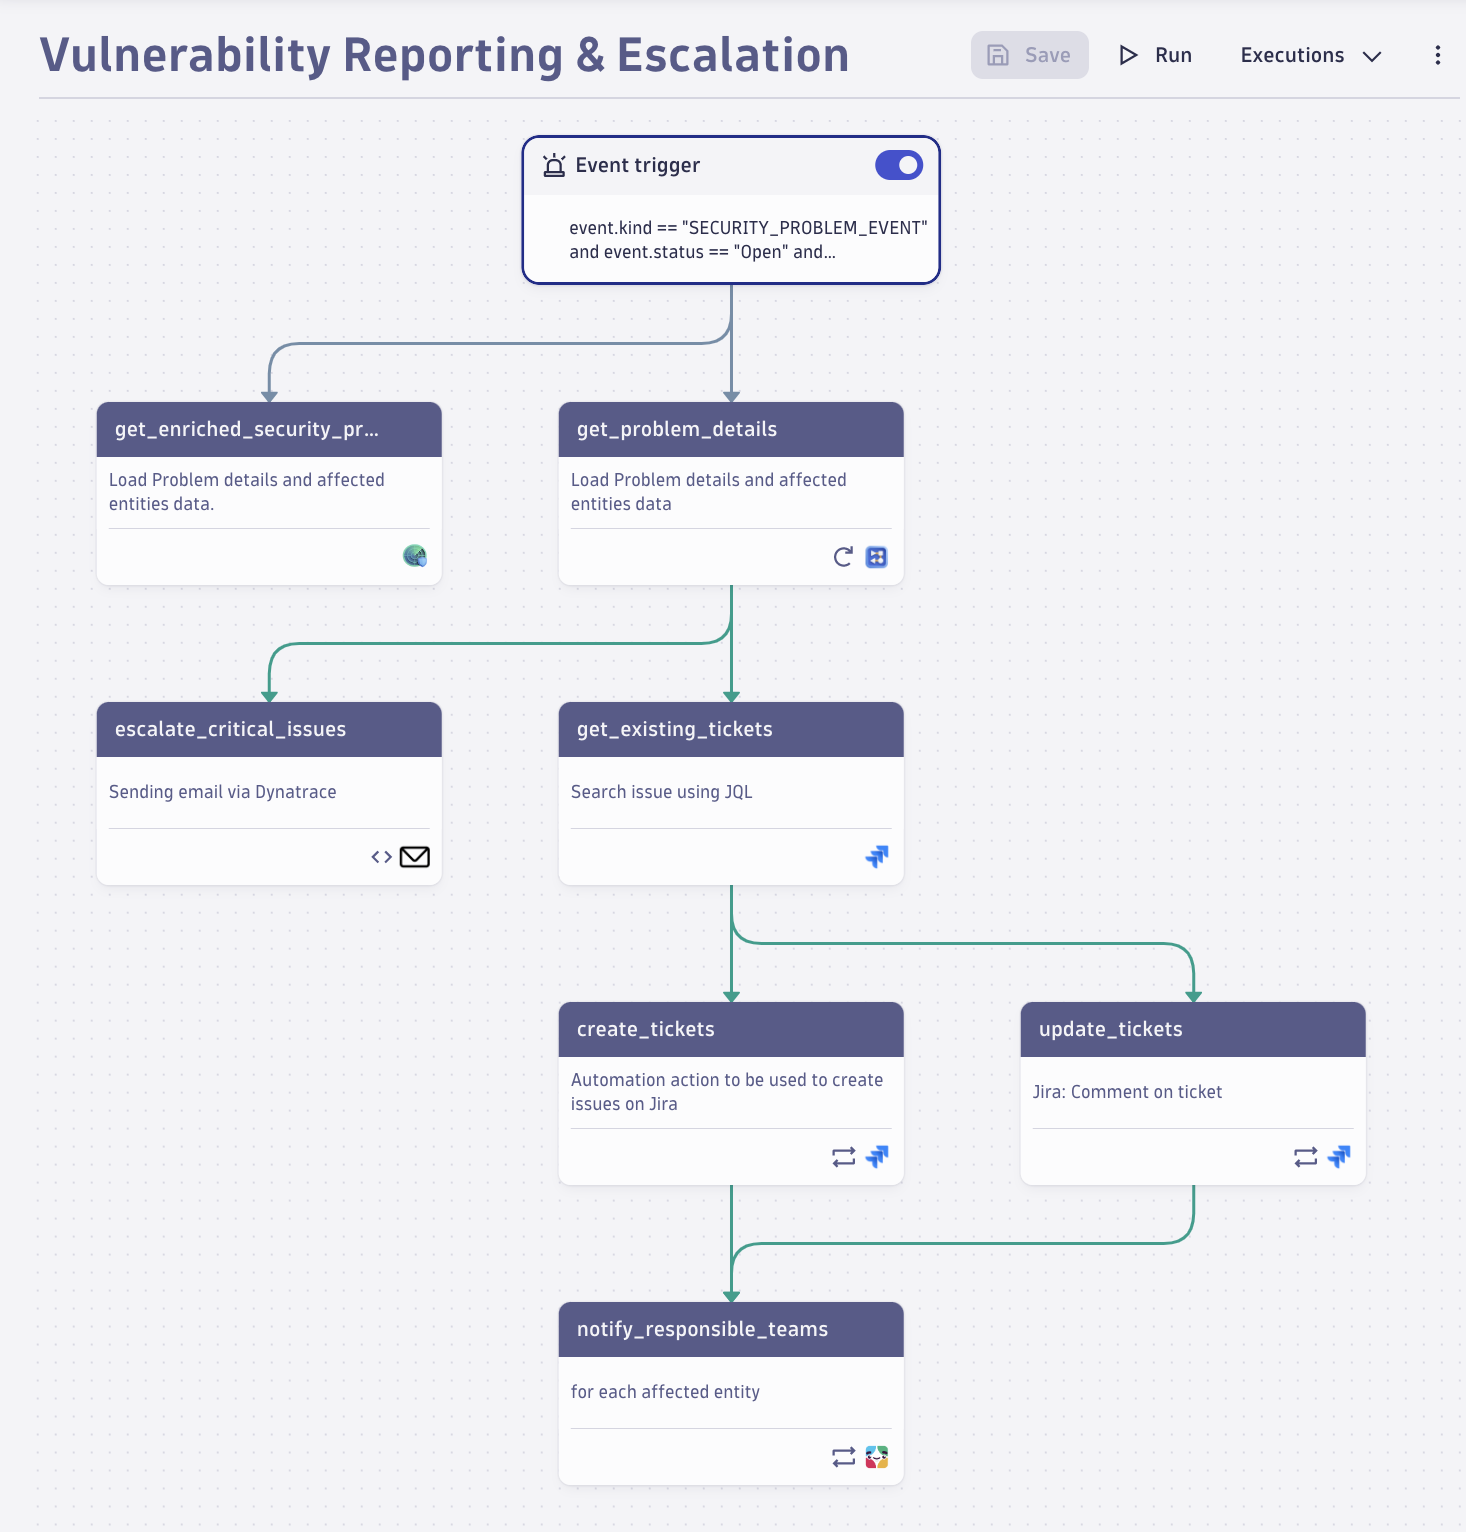 Vulnerability Reporting and Escalation workflow